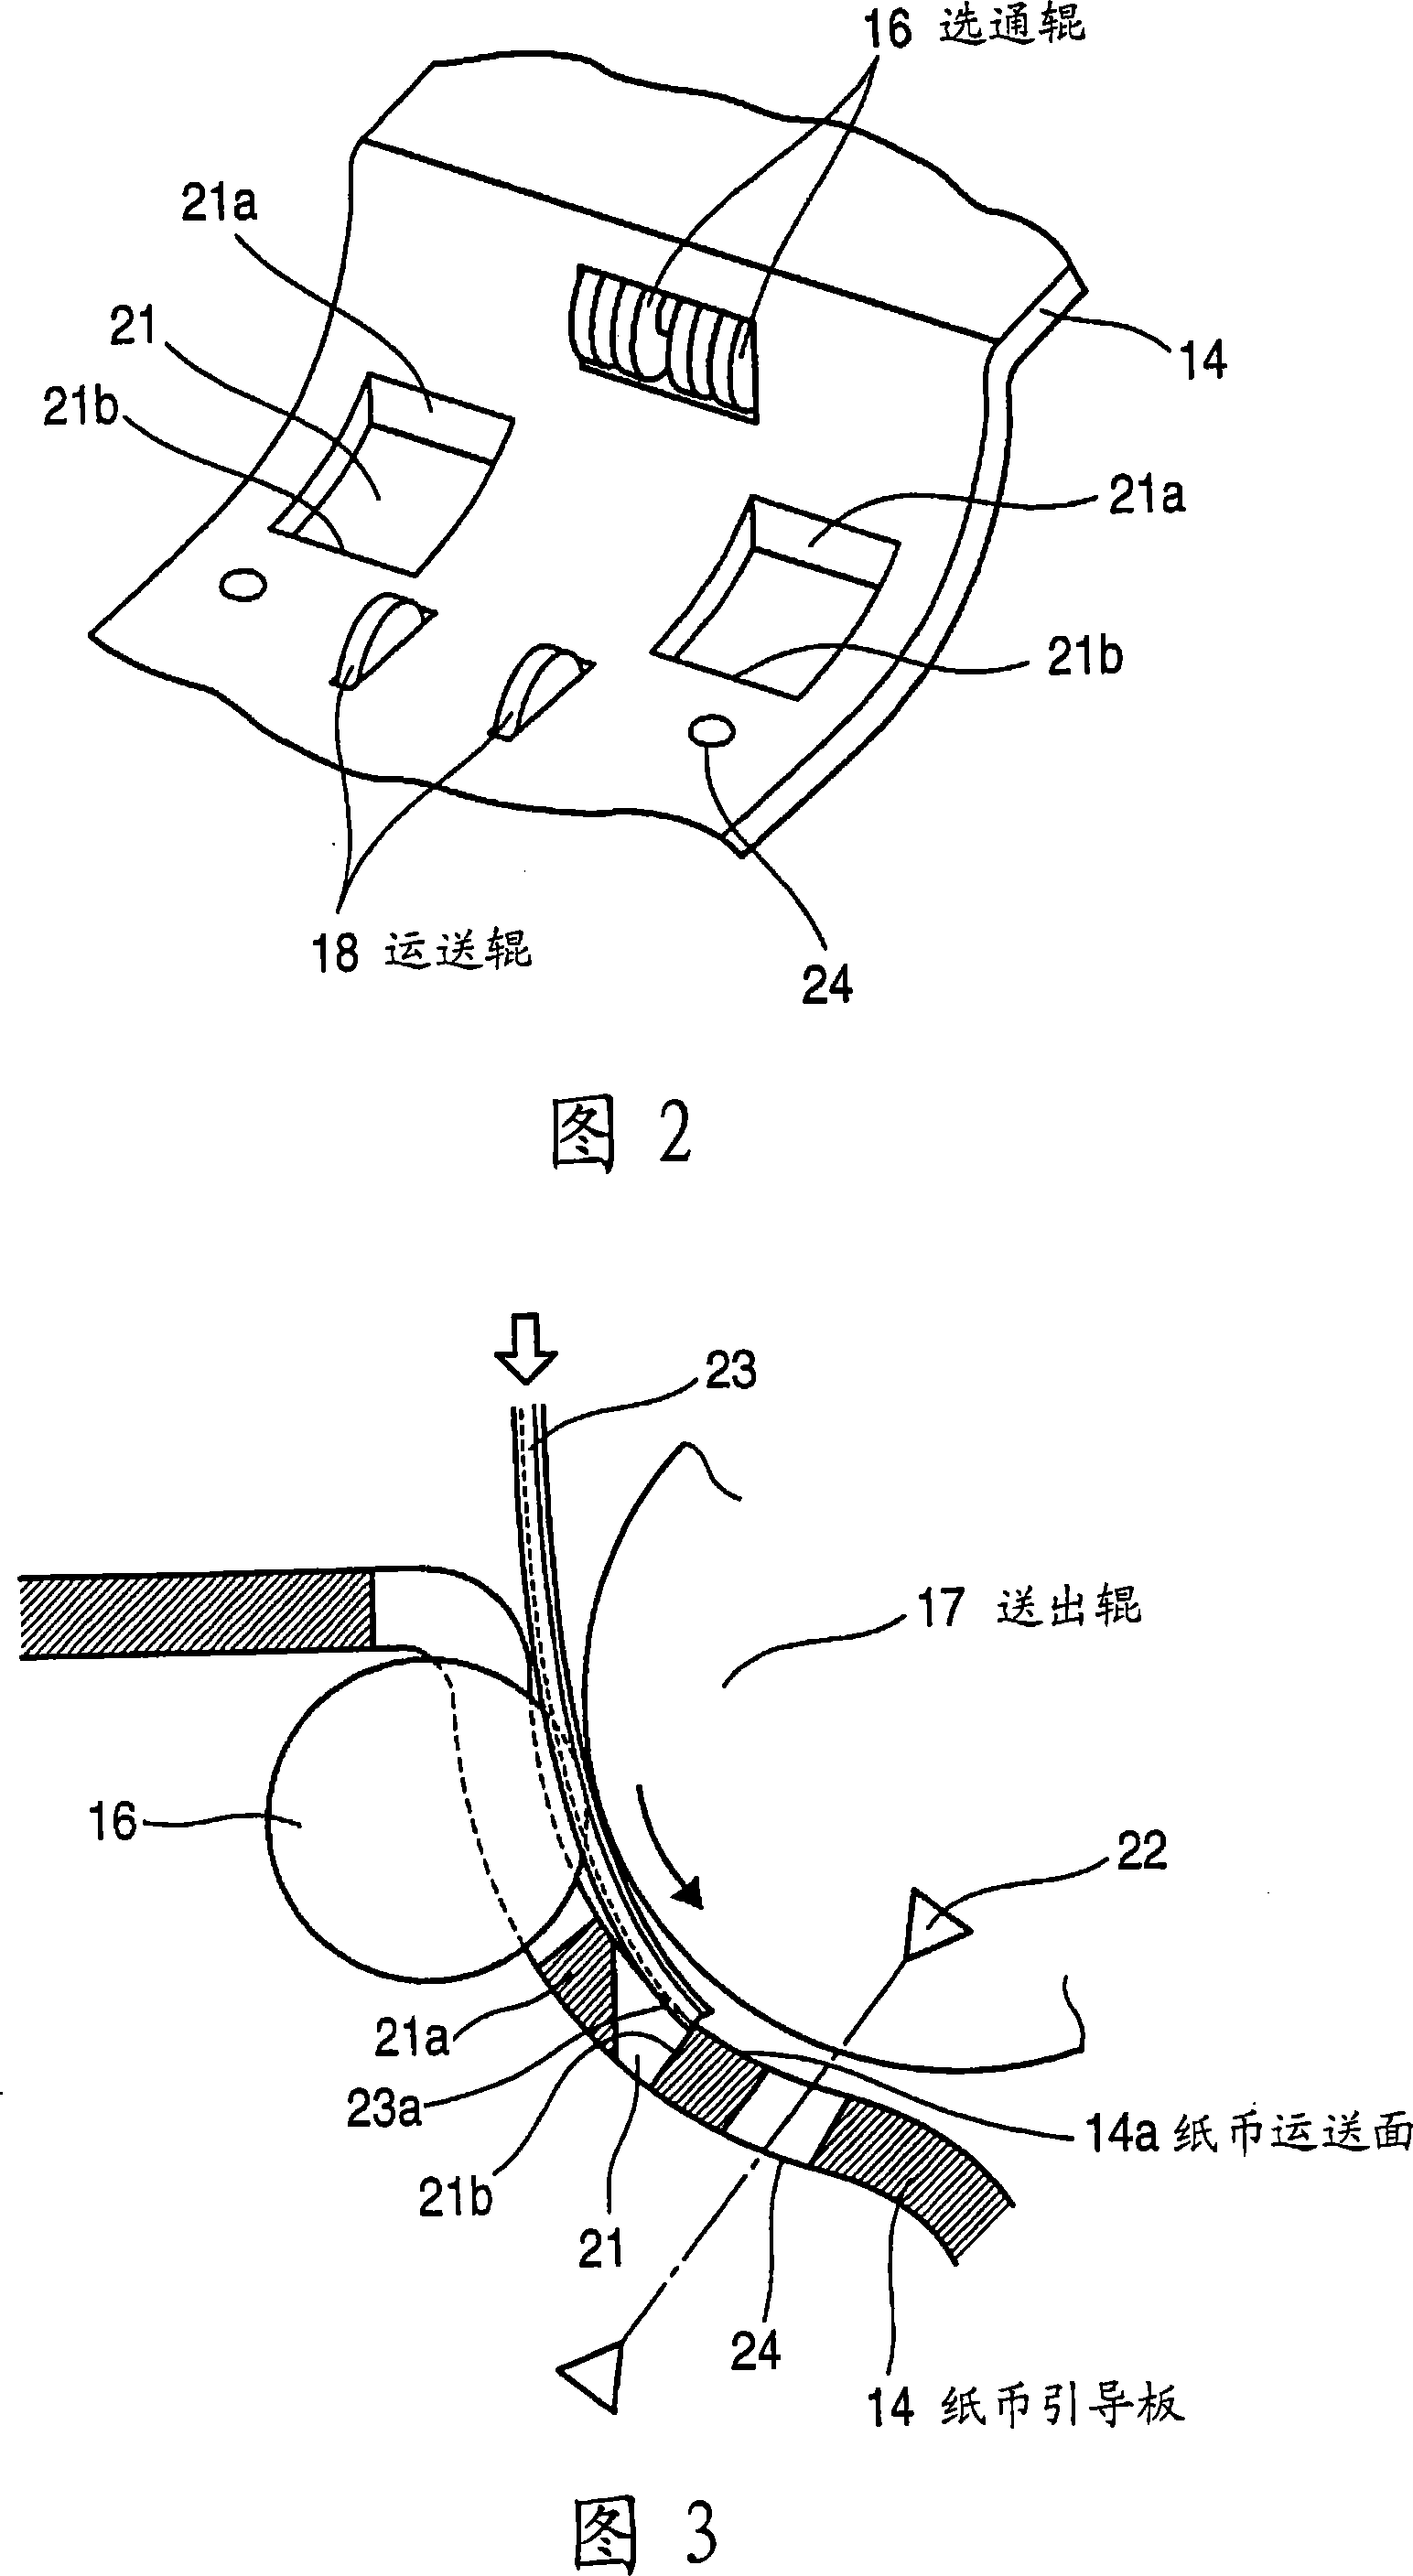 Banknote treatment device